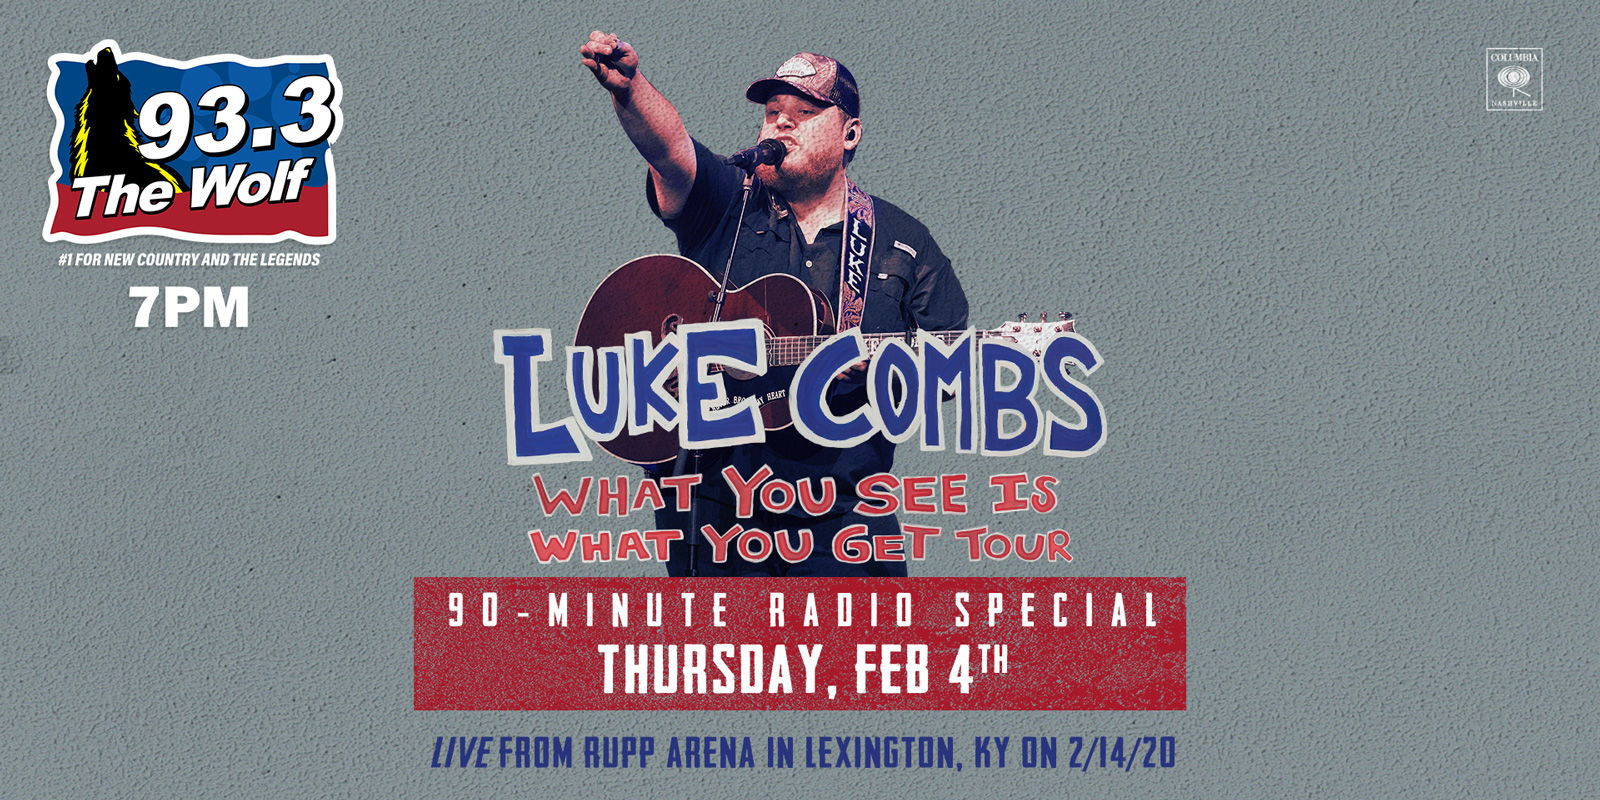 Luke Combs Concert Special Thursday February 4th at 7pm On The Wolf